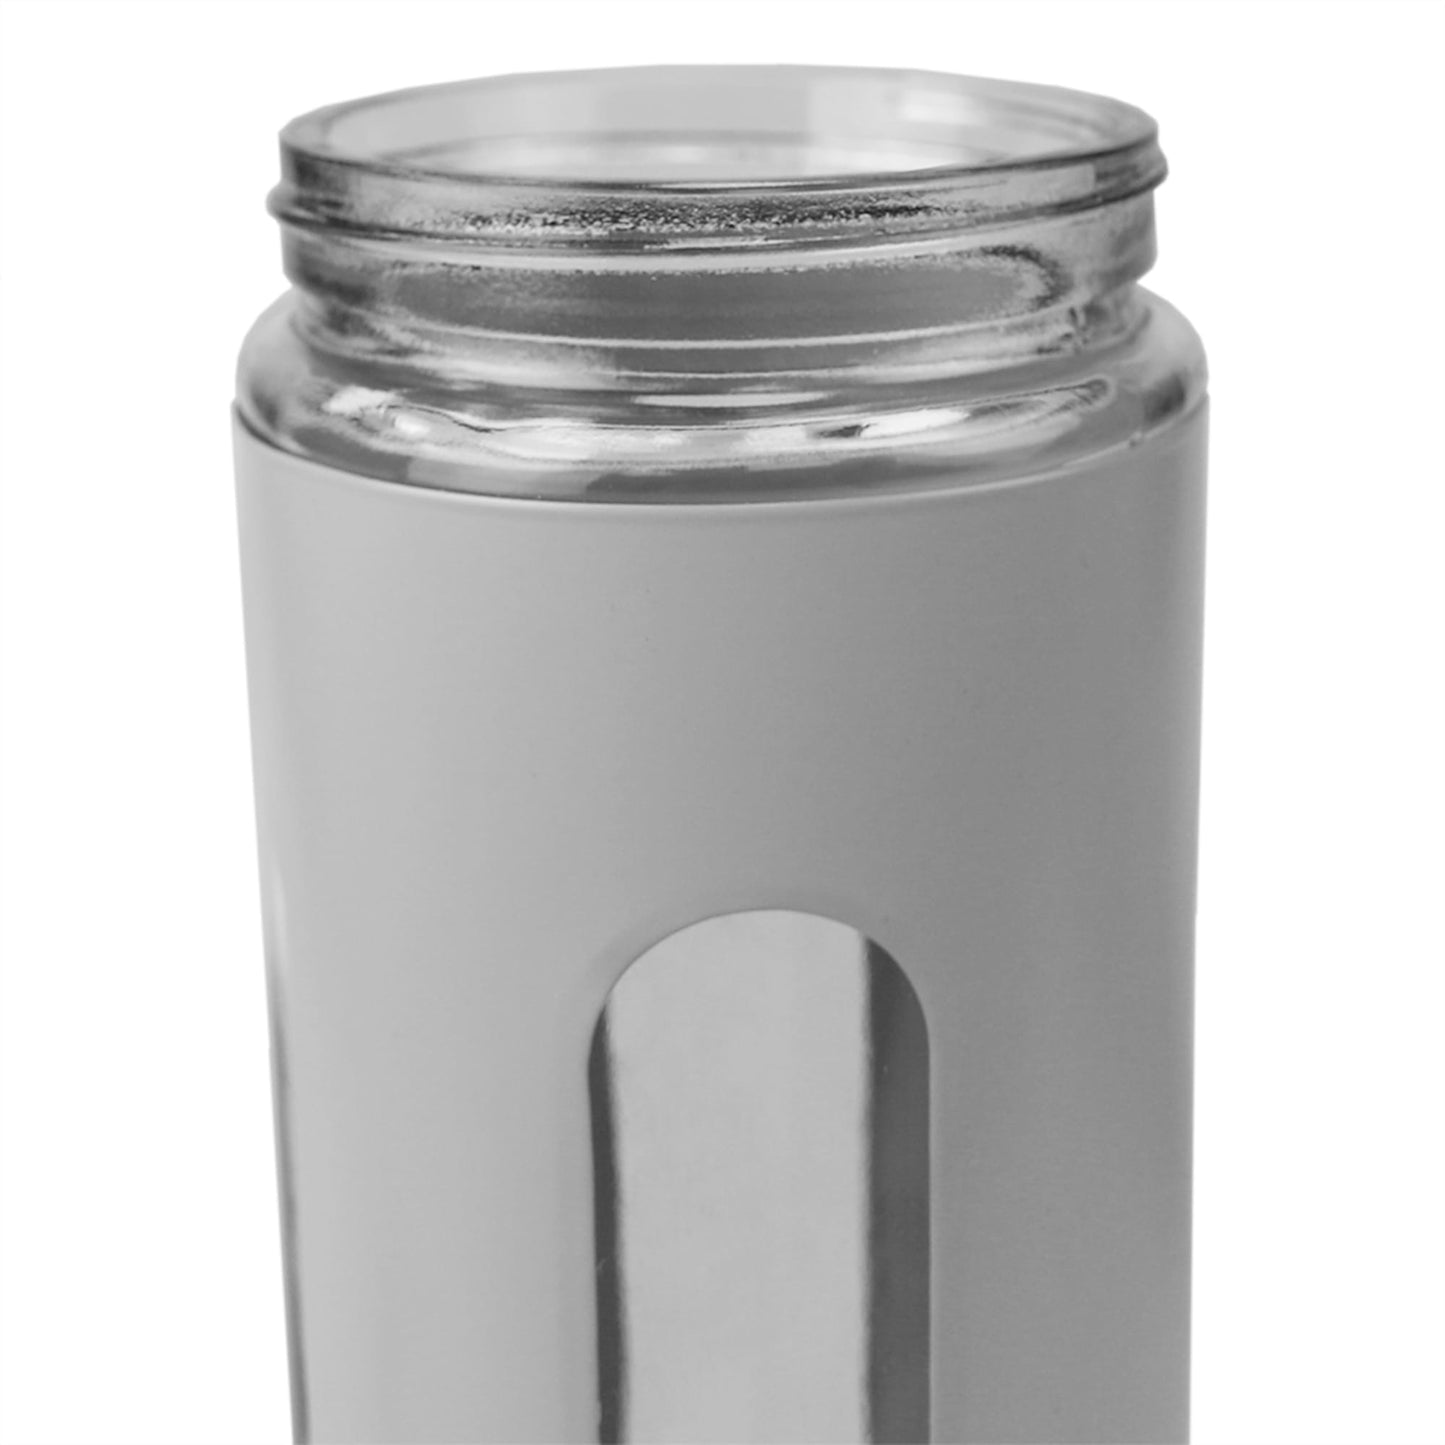 4 Piece Stainless Steel Canisters with Multiple Peek-Through Windows, Grey